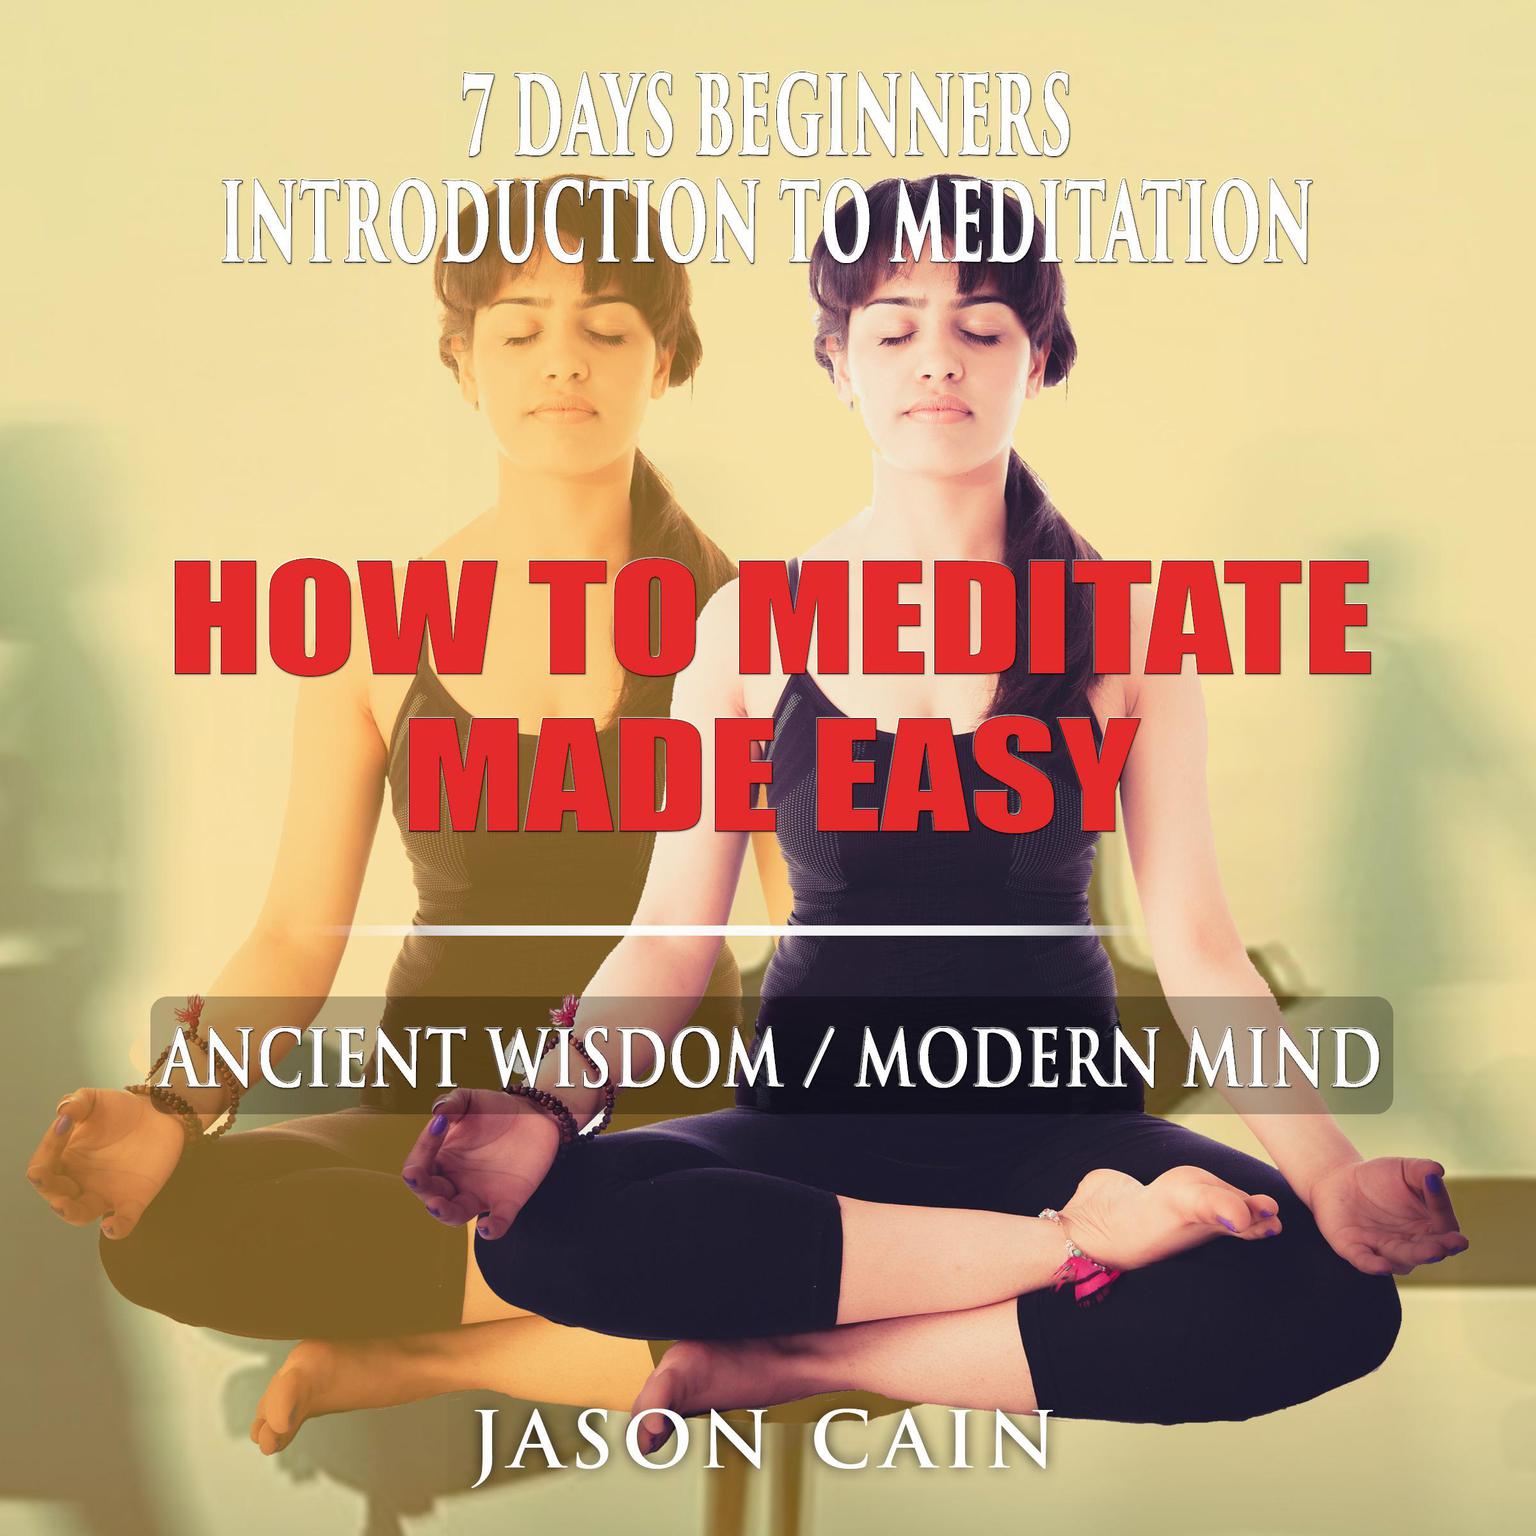 HOW TO MEDITATE MADE EASY: 7 DAYS BEGINNERS INTRODUCTION TO MEDITATION Audiobook, by Jason Cain